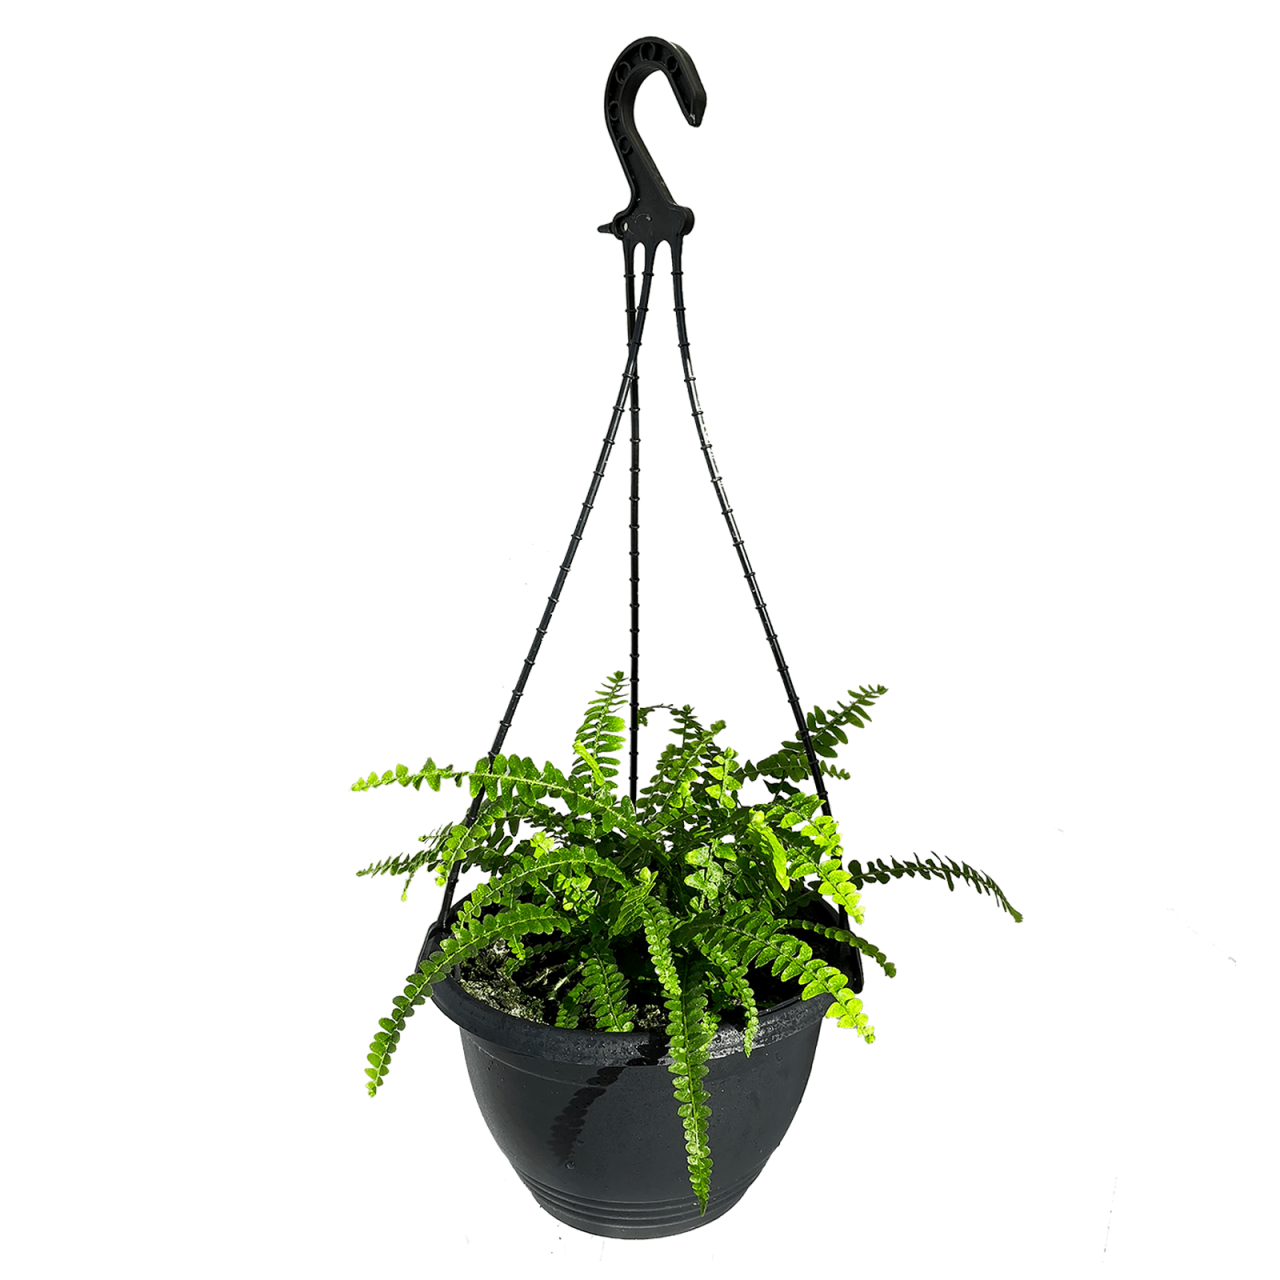 Hanging Plants Indoor | Bunnings Hanging Ferns: A Guide to Varieties, Care, and Design